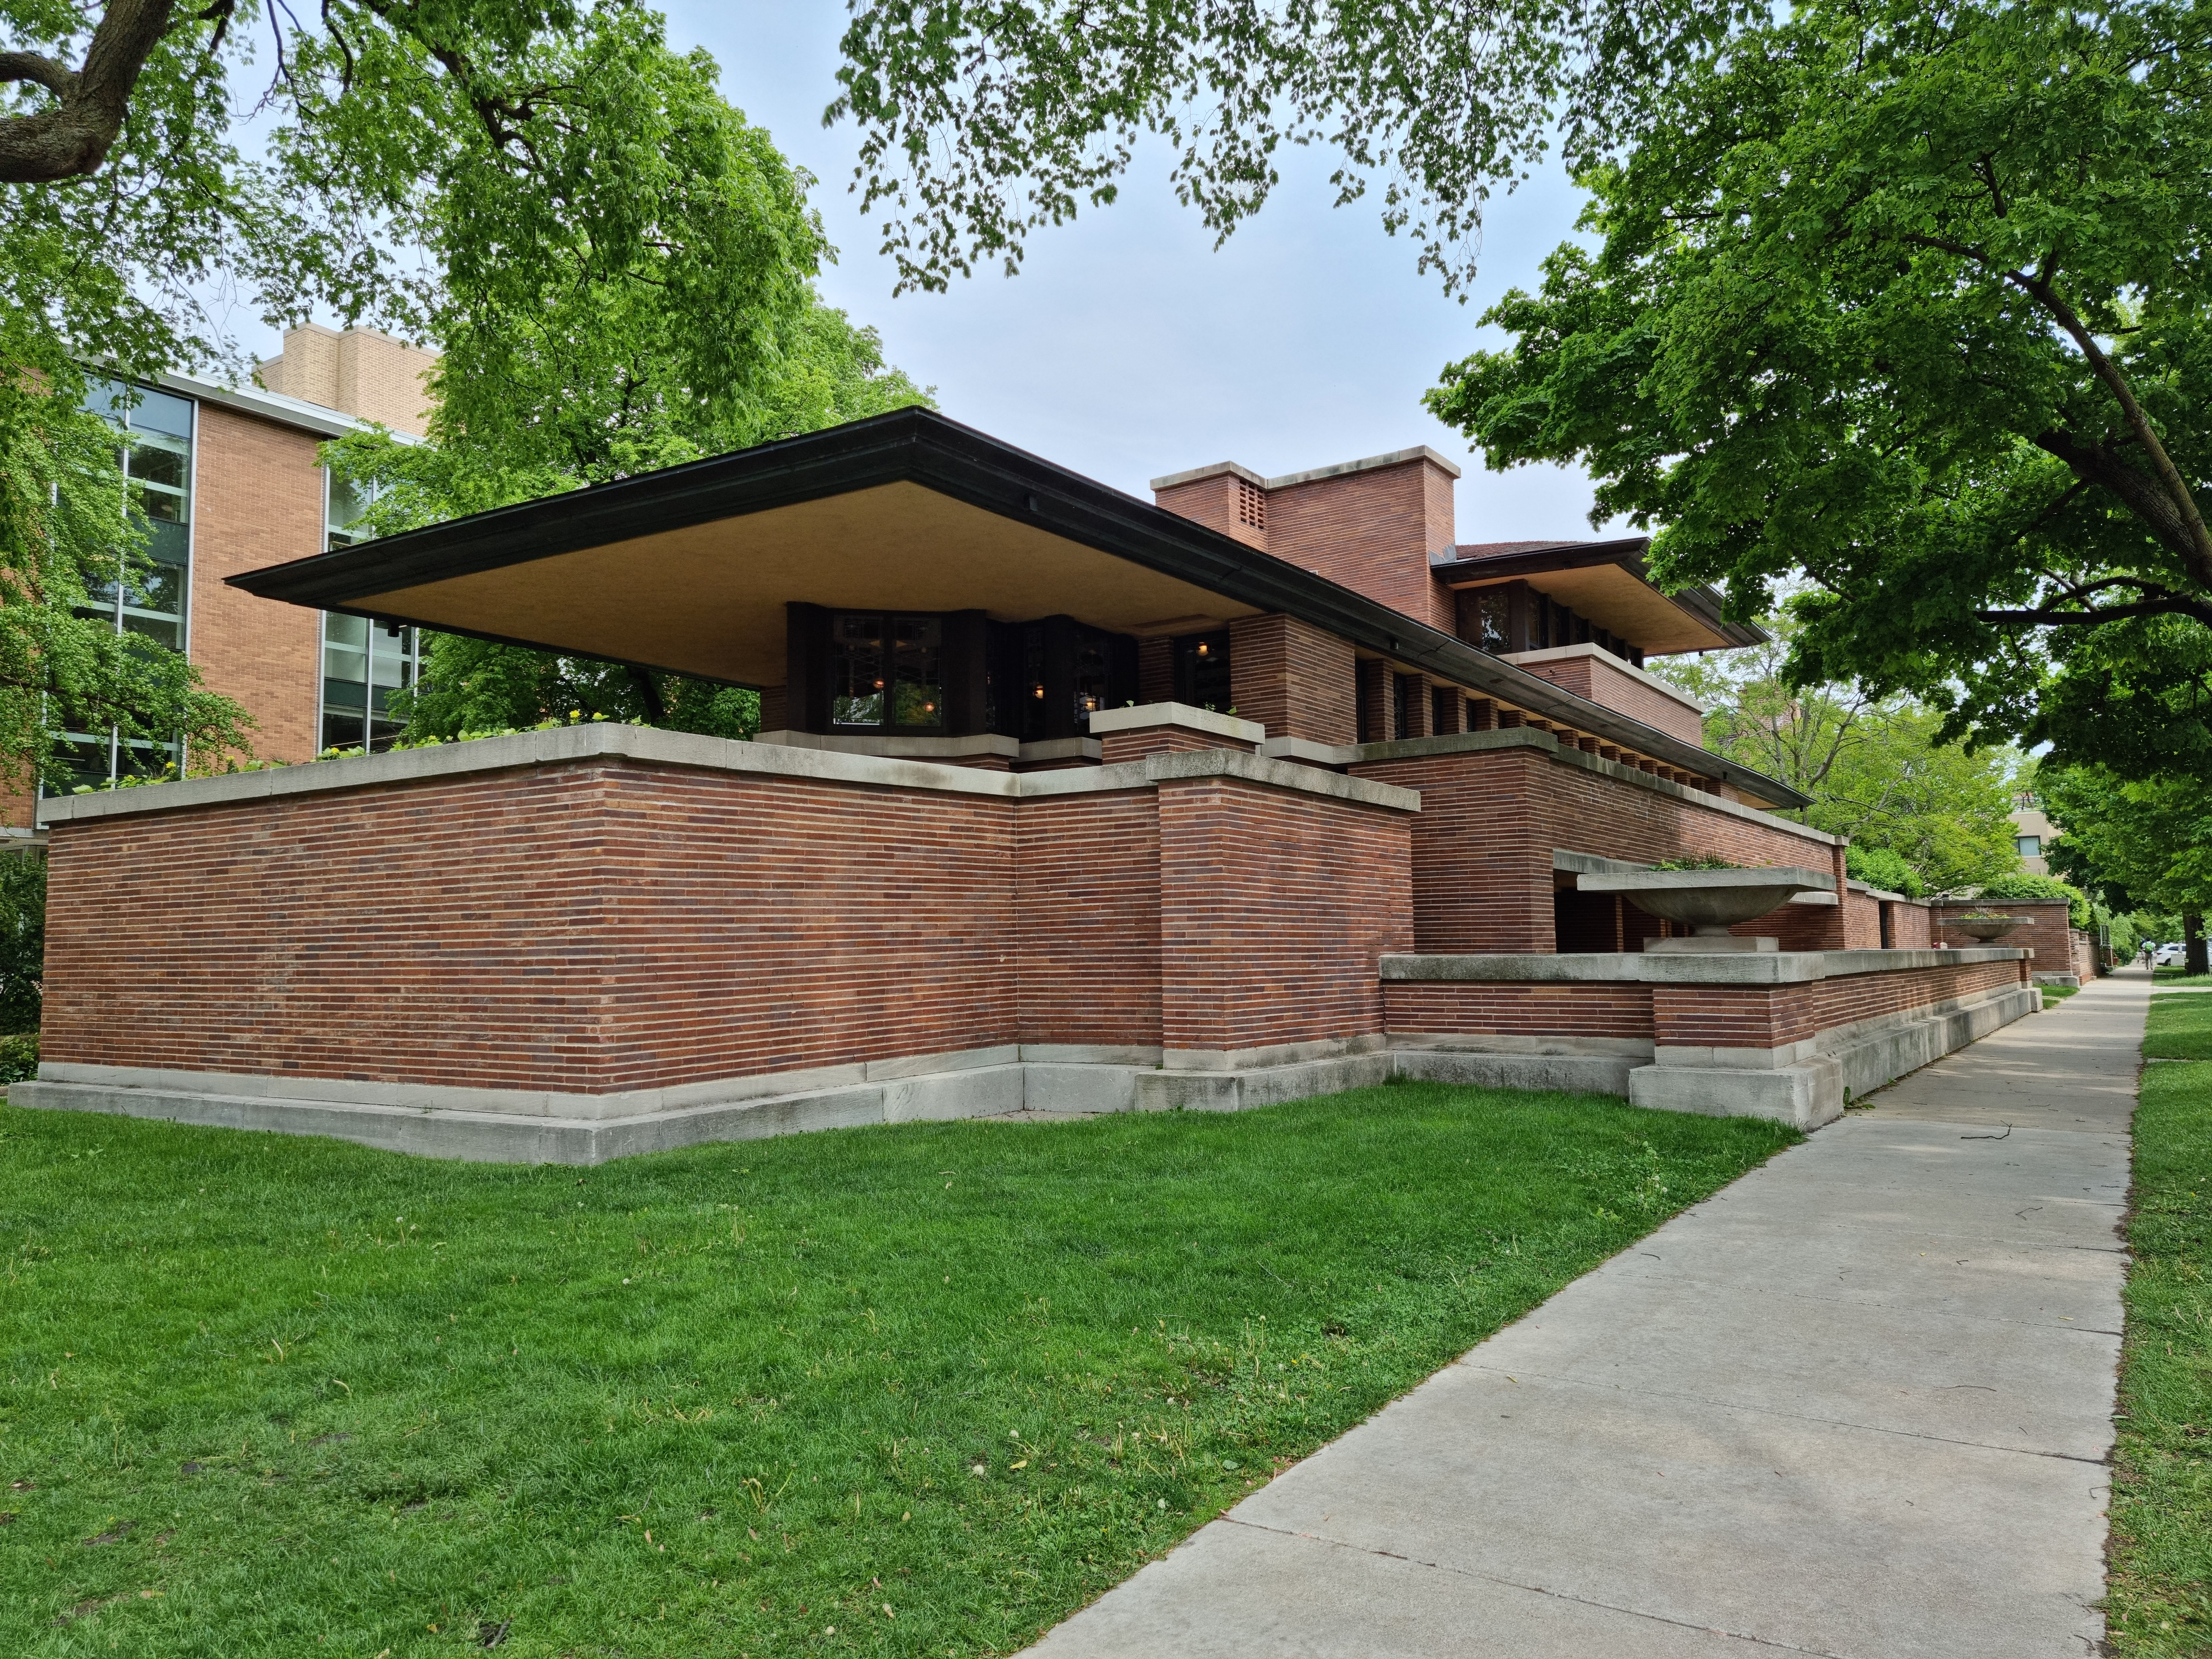 Picture of a place: Frederick C. Robie House